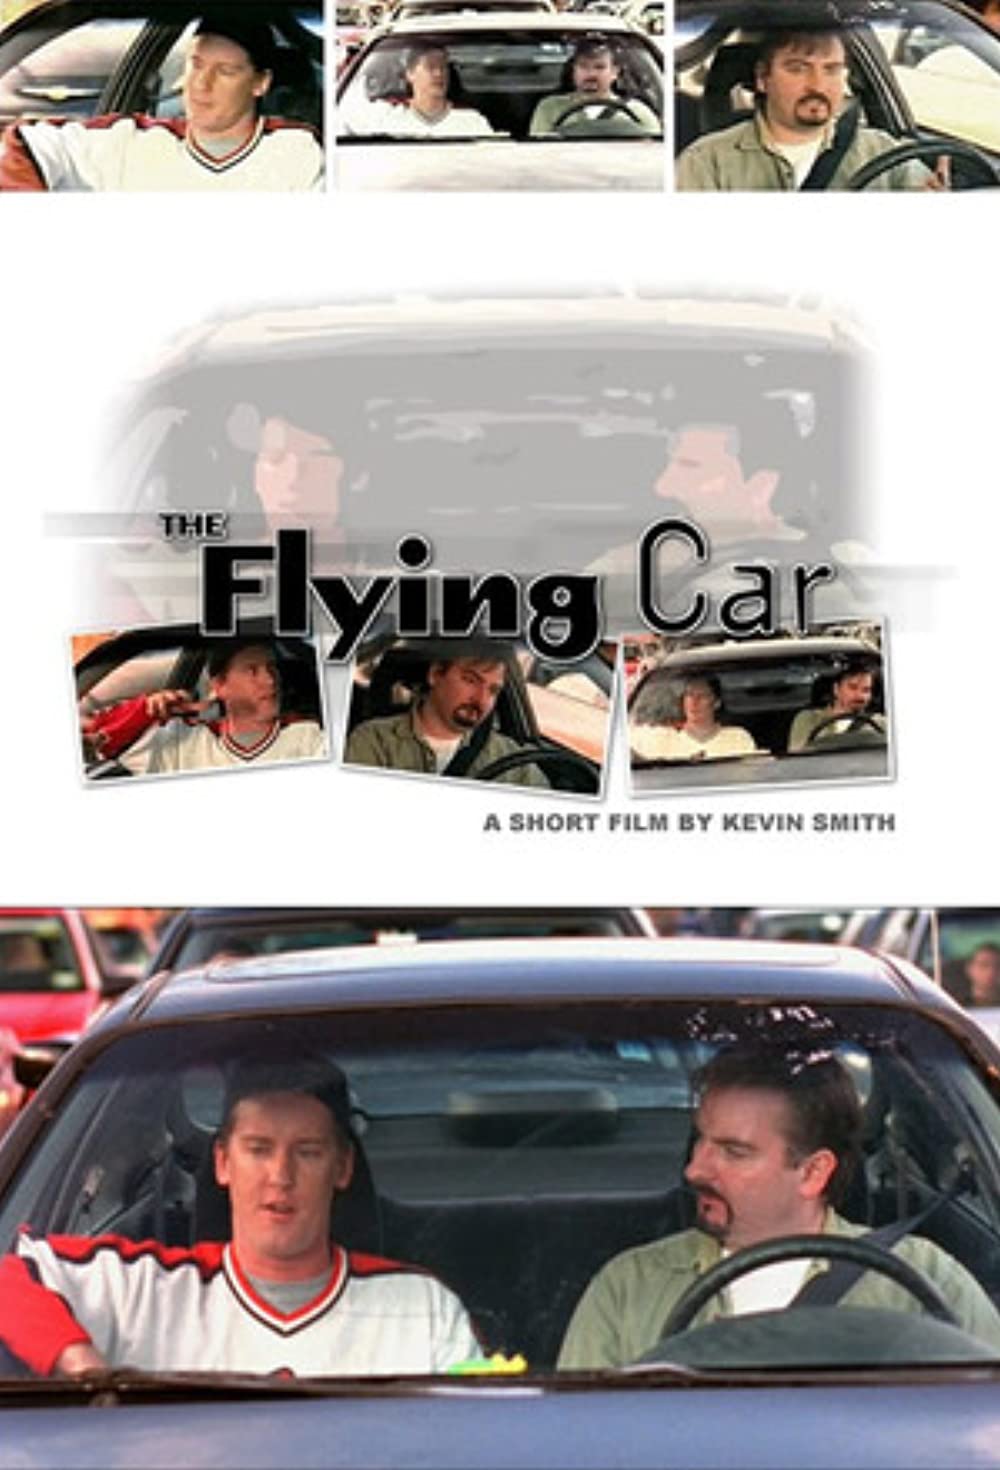 The Flying Car is a six-minute 2002 short film written and directed by Kevin Smith. It stars Brian O'Halloran and Jeff Anderson as the View Askewniverse characters Dante Hicks and Randal Graves, who were introduced in Clerks.